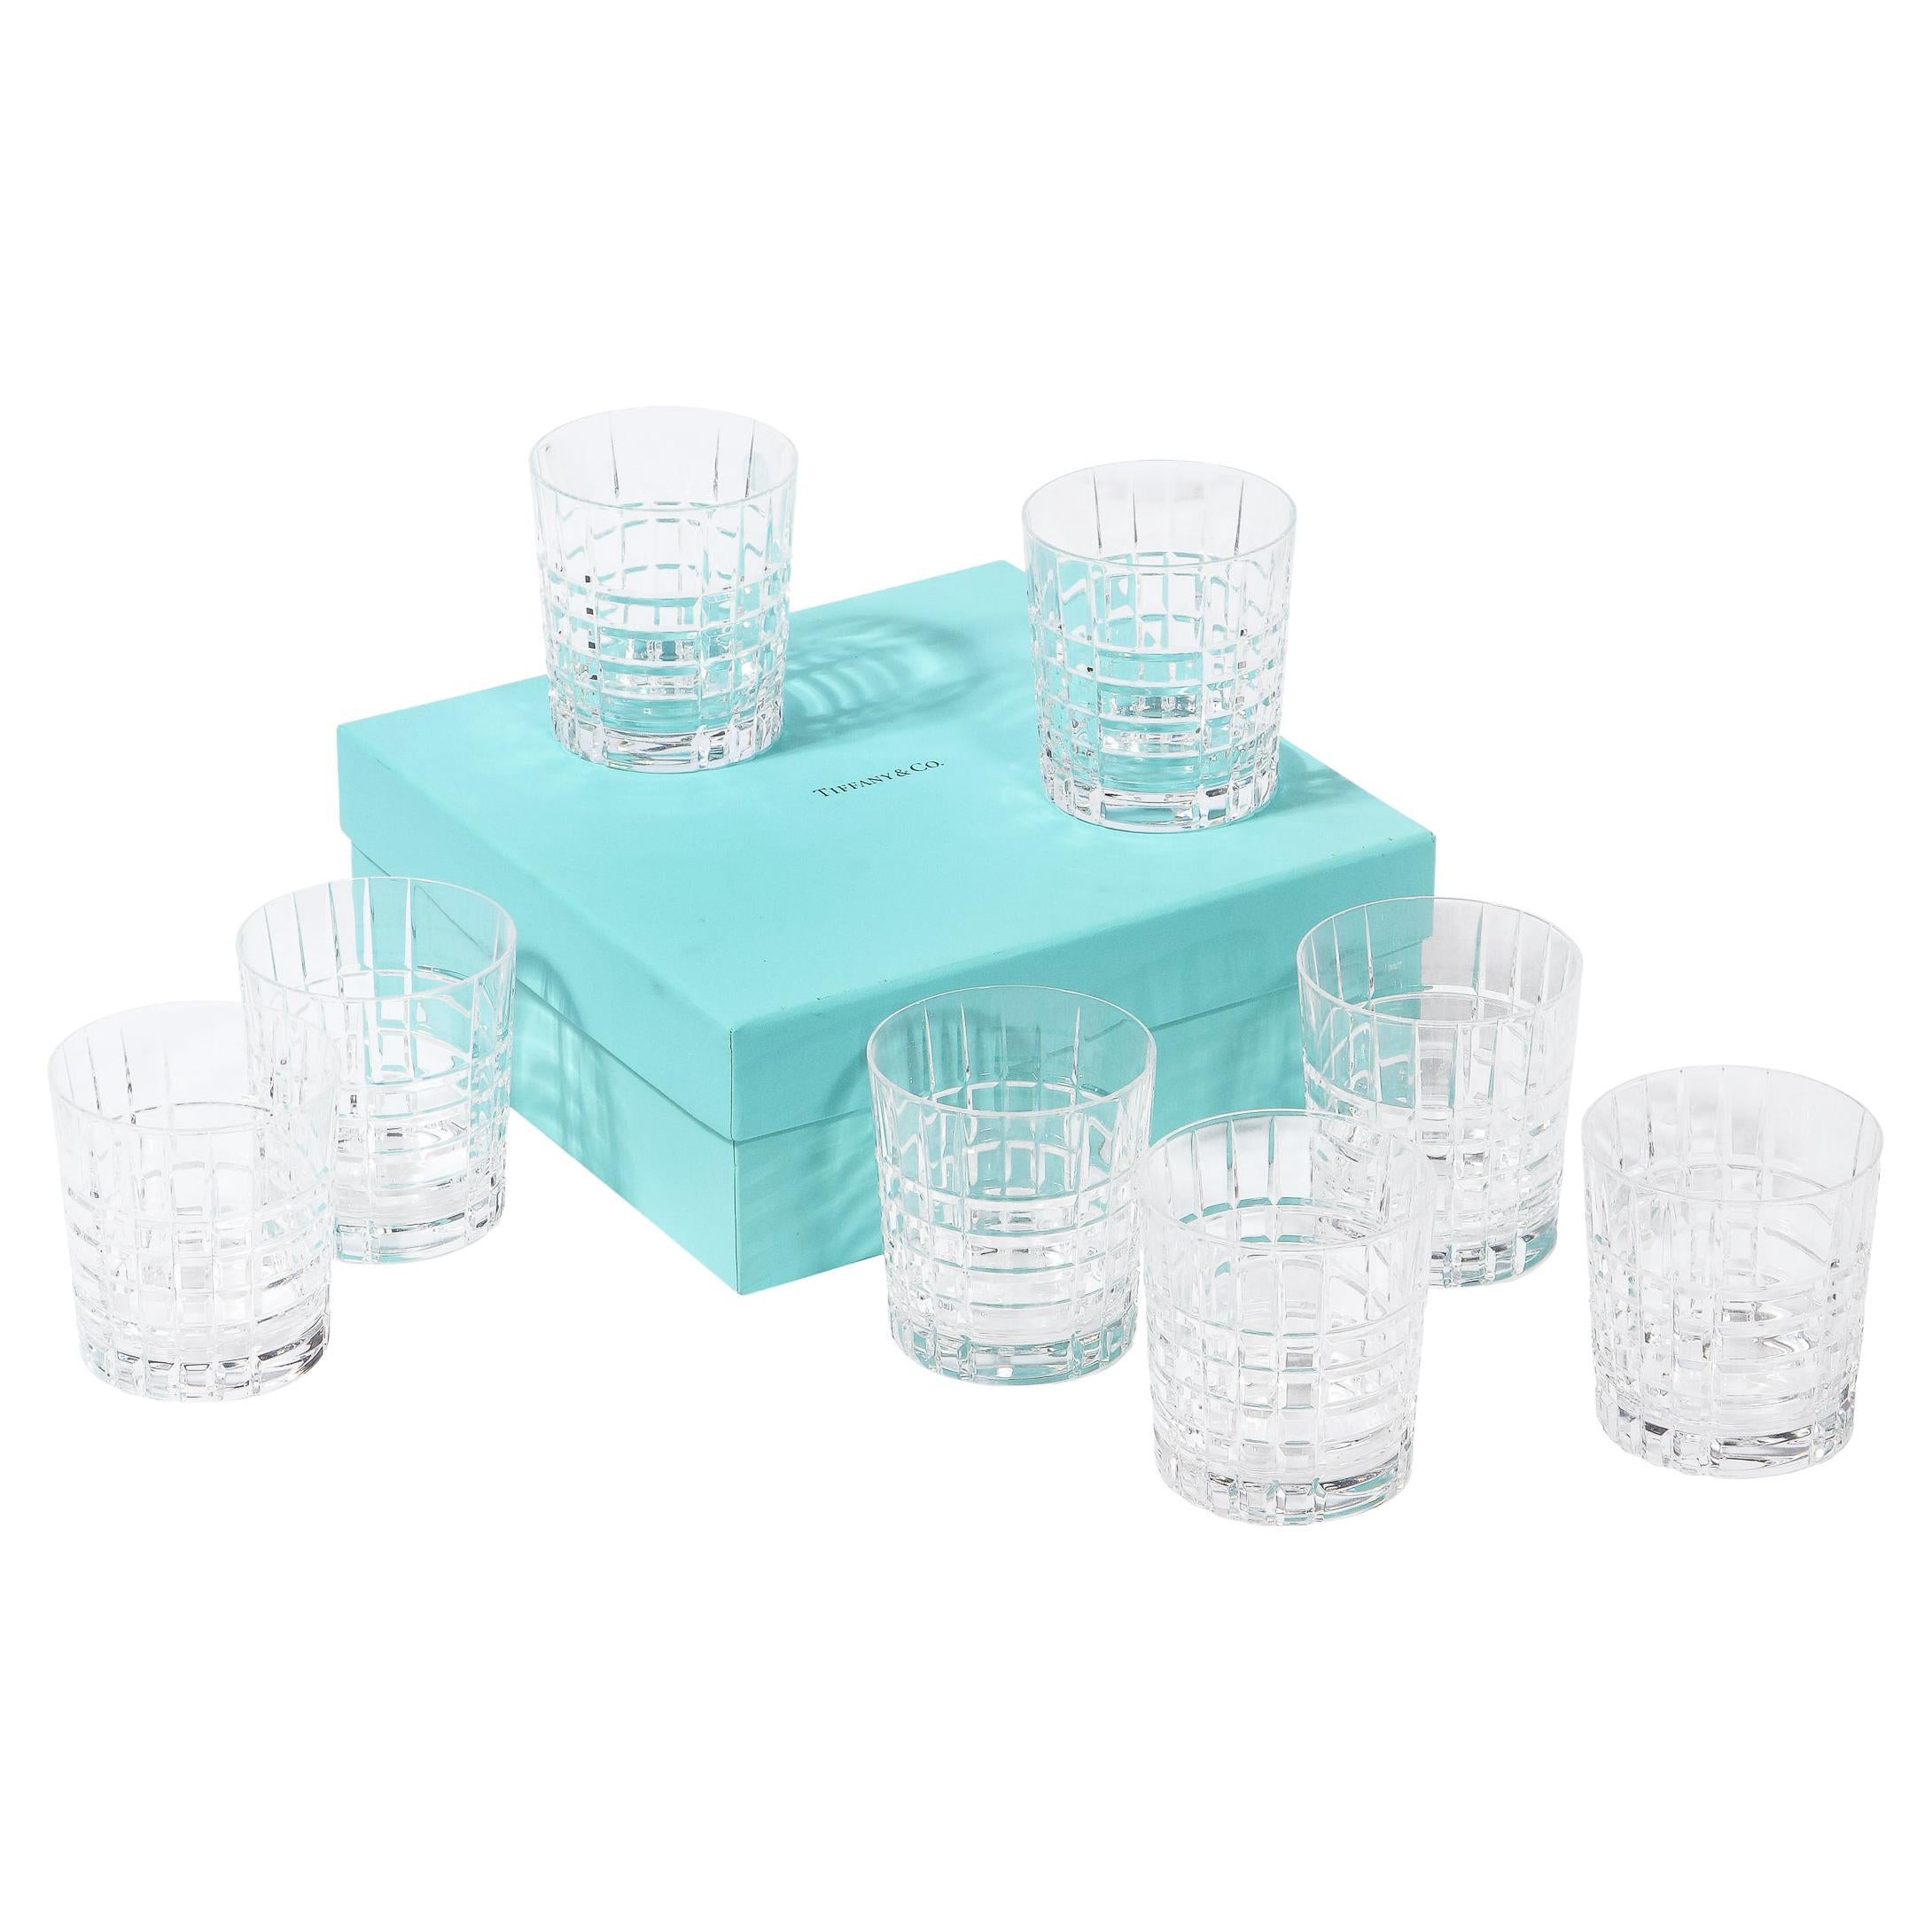 Set of 8 Modernist Square Plaid Crystal Drink Glasses/ Tumblers by Tiffany & Co.